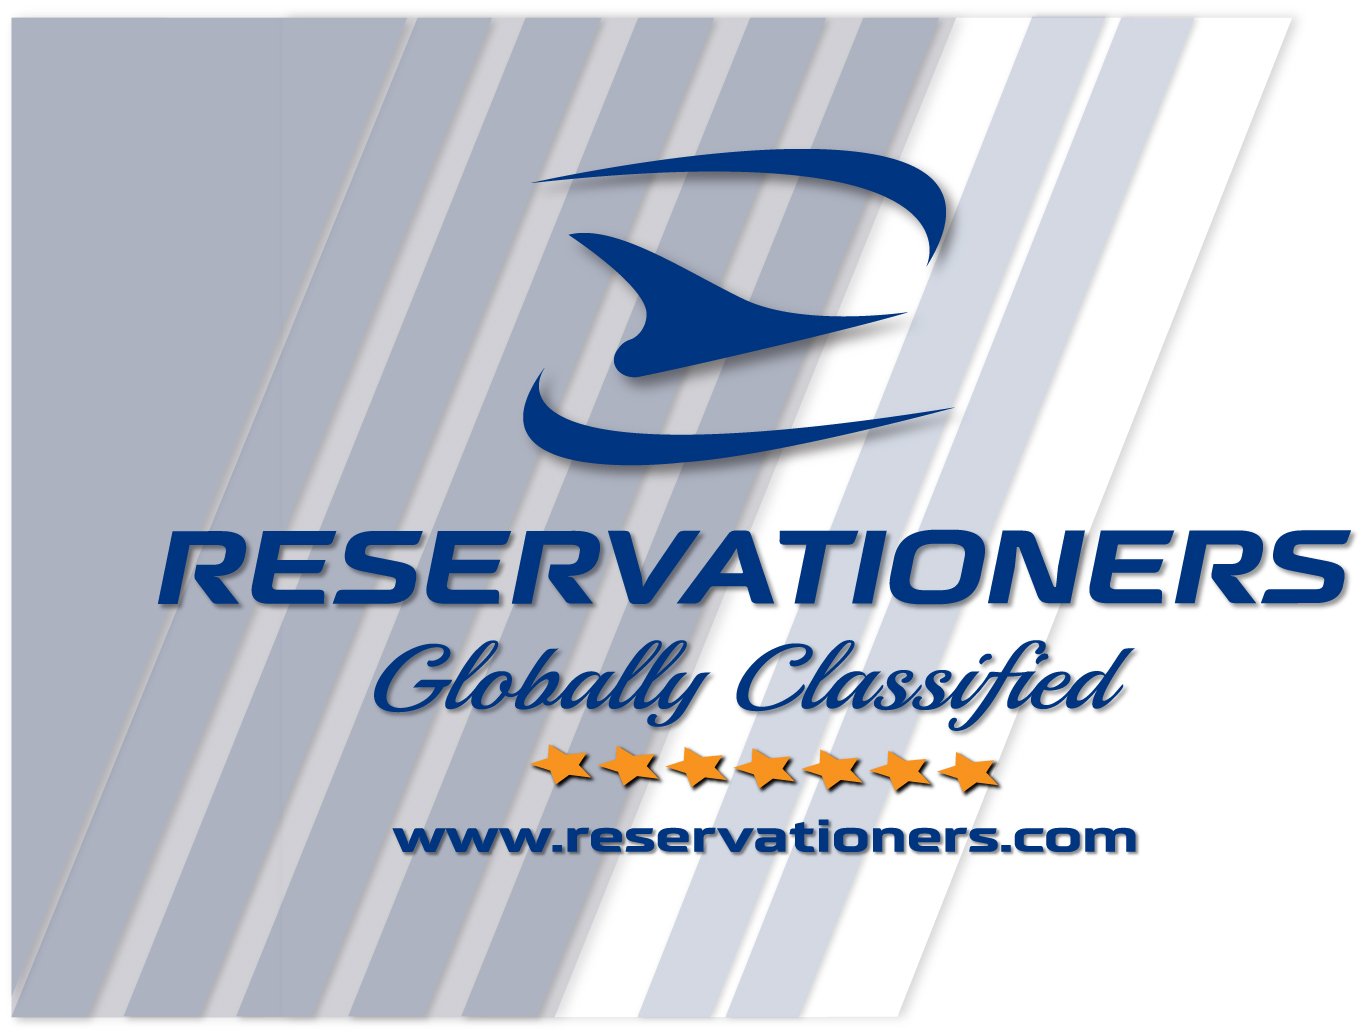 Reservationers is now recognized by IATA